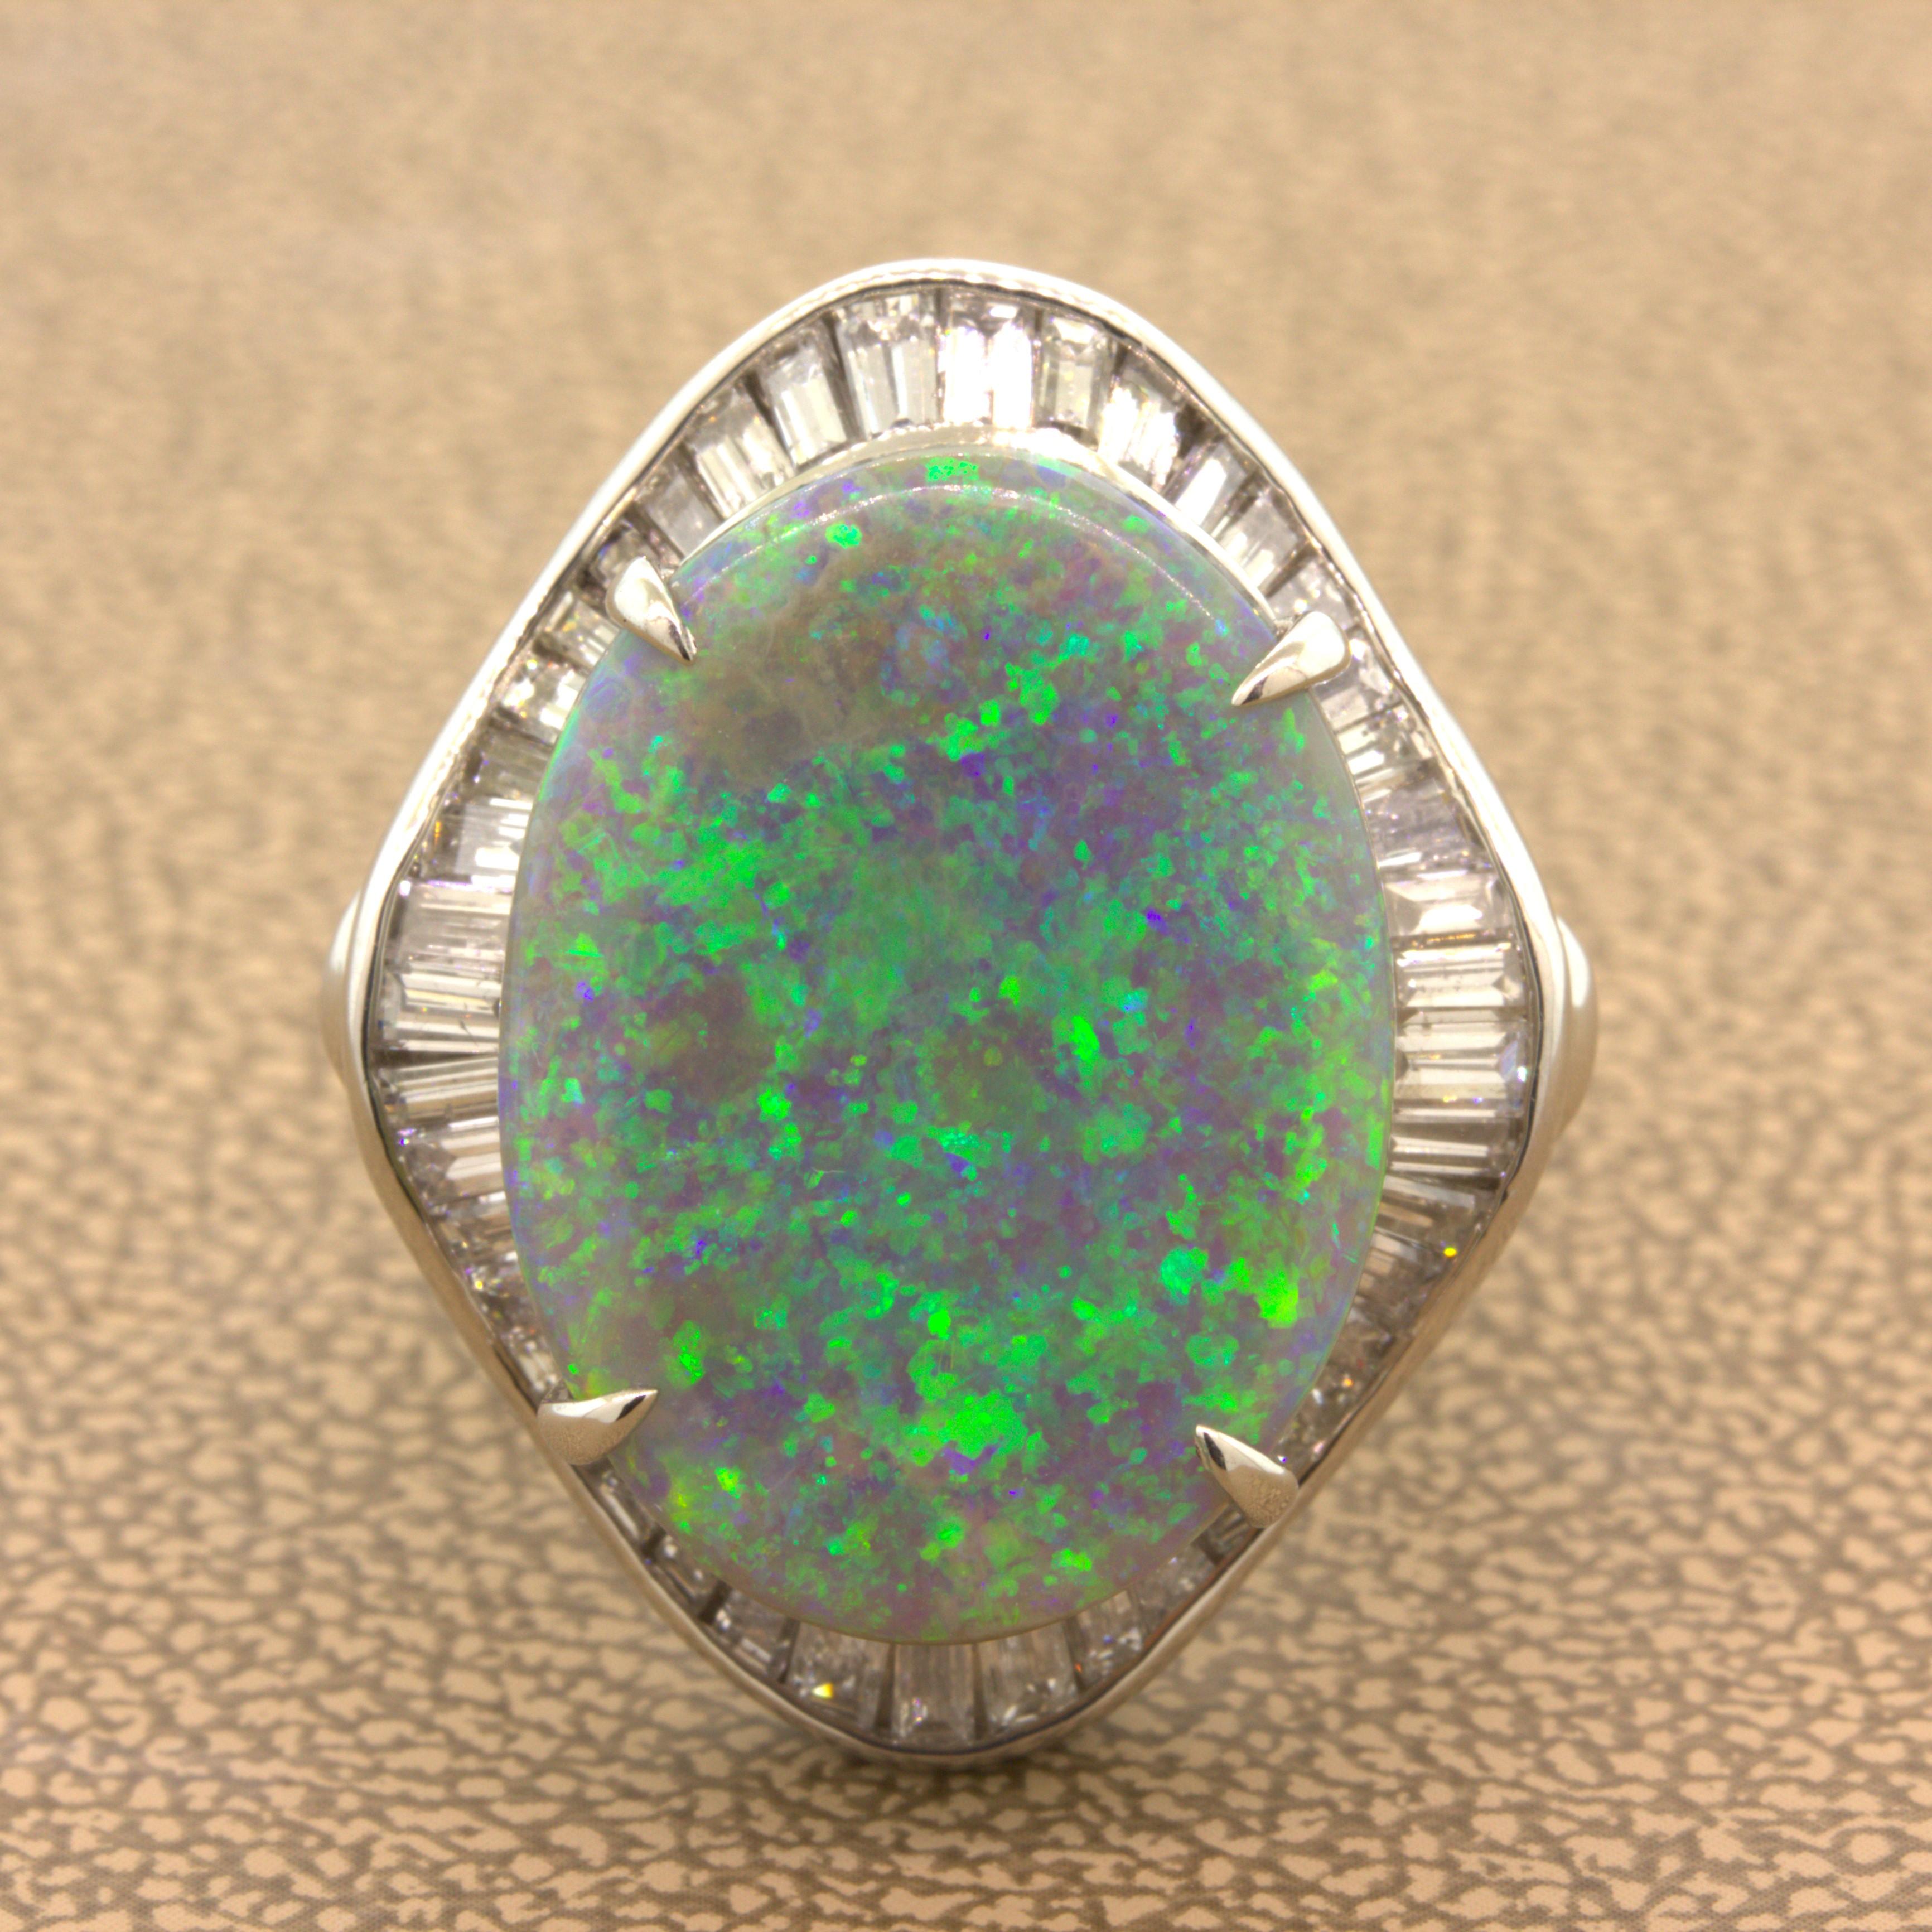 A beautiful gem Australian opal takes center stage of this well-made platinum ring. It weighs an impressive 9.30 carats and has excellent play-of-color. The opal has a very strong pin-fire pattern which shimmers in the light with colors of primarily